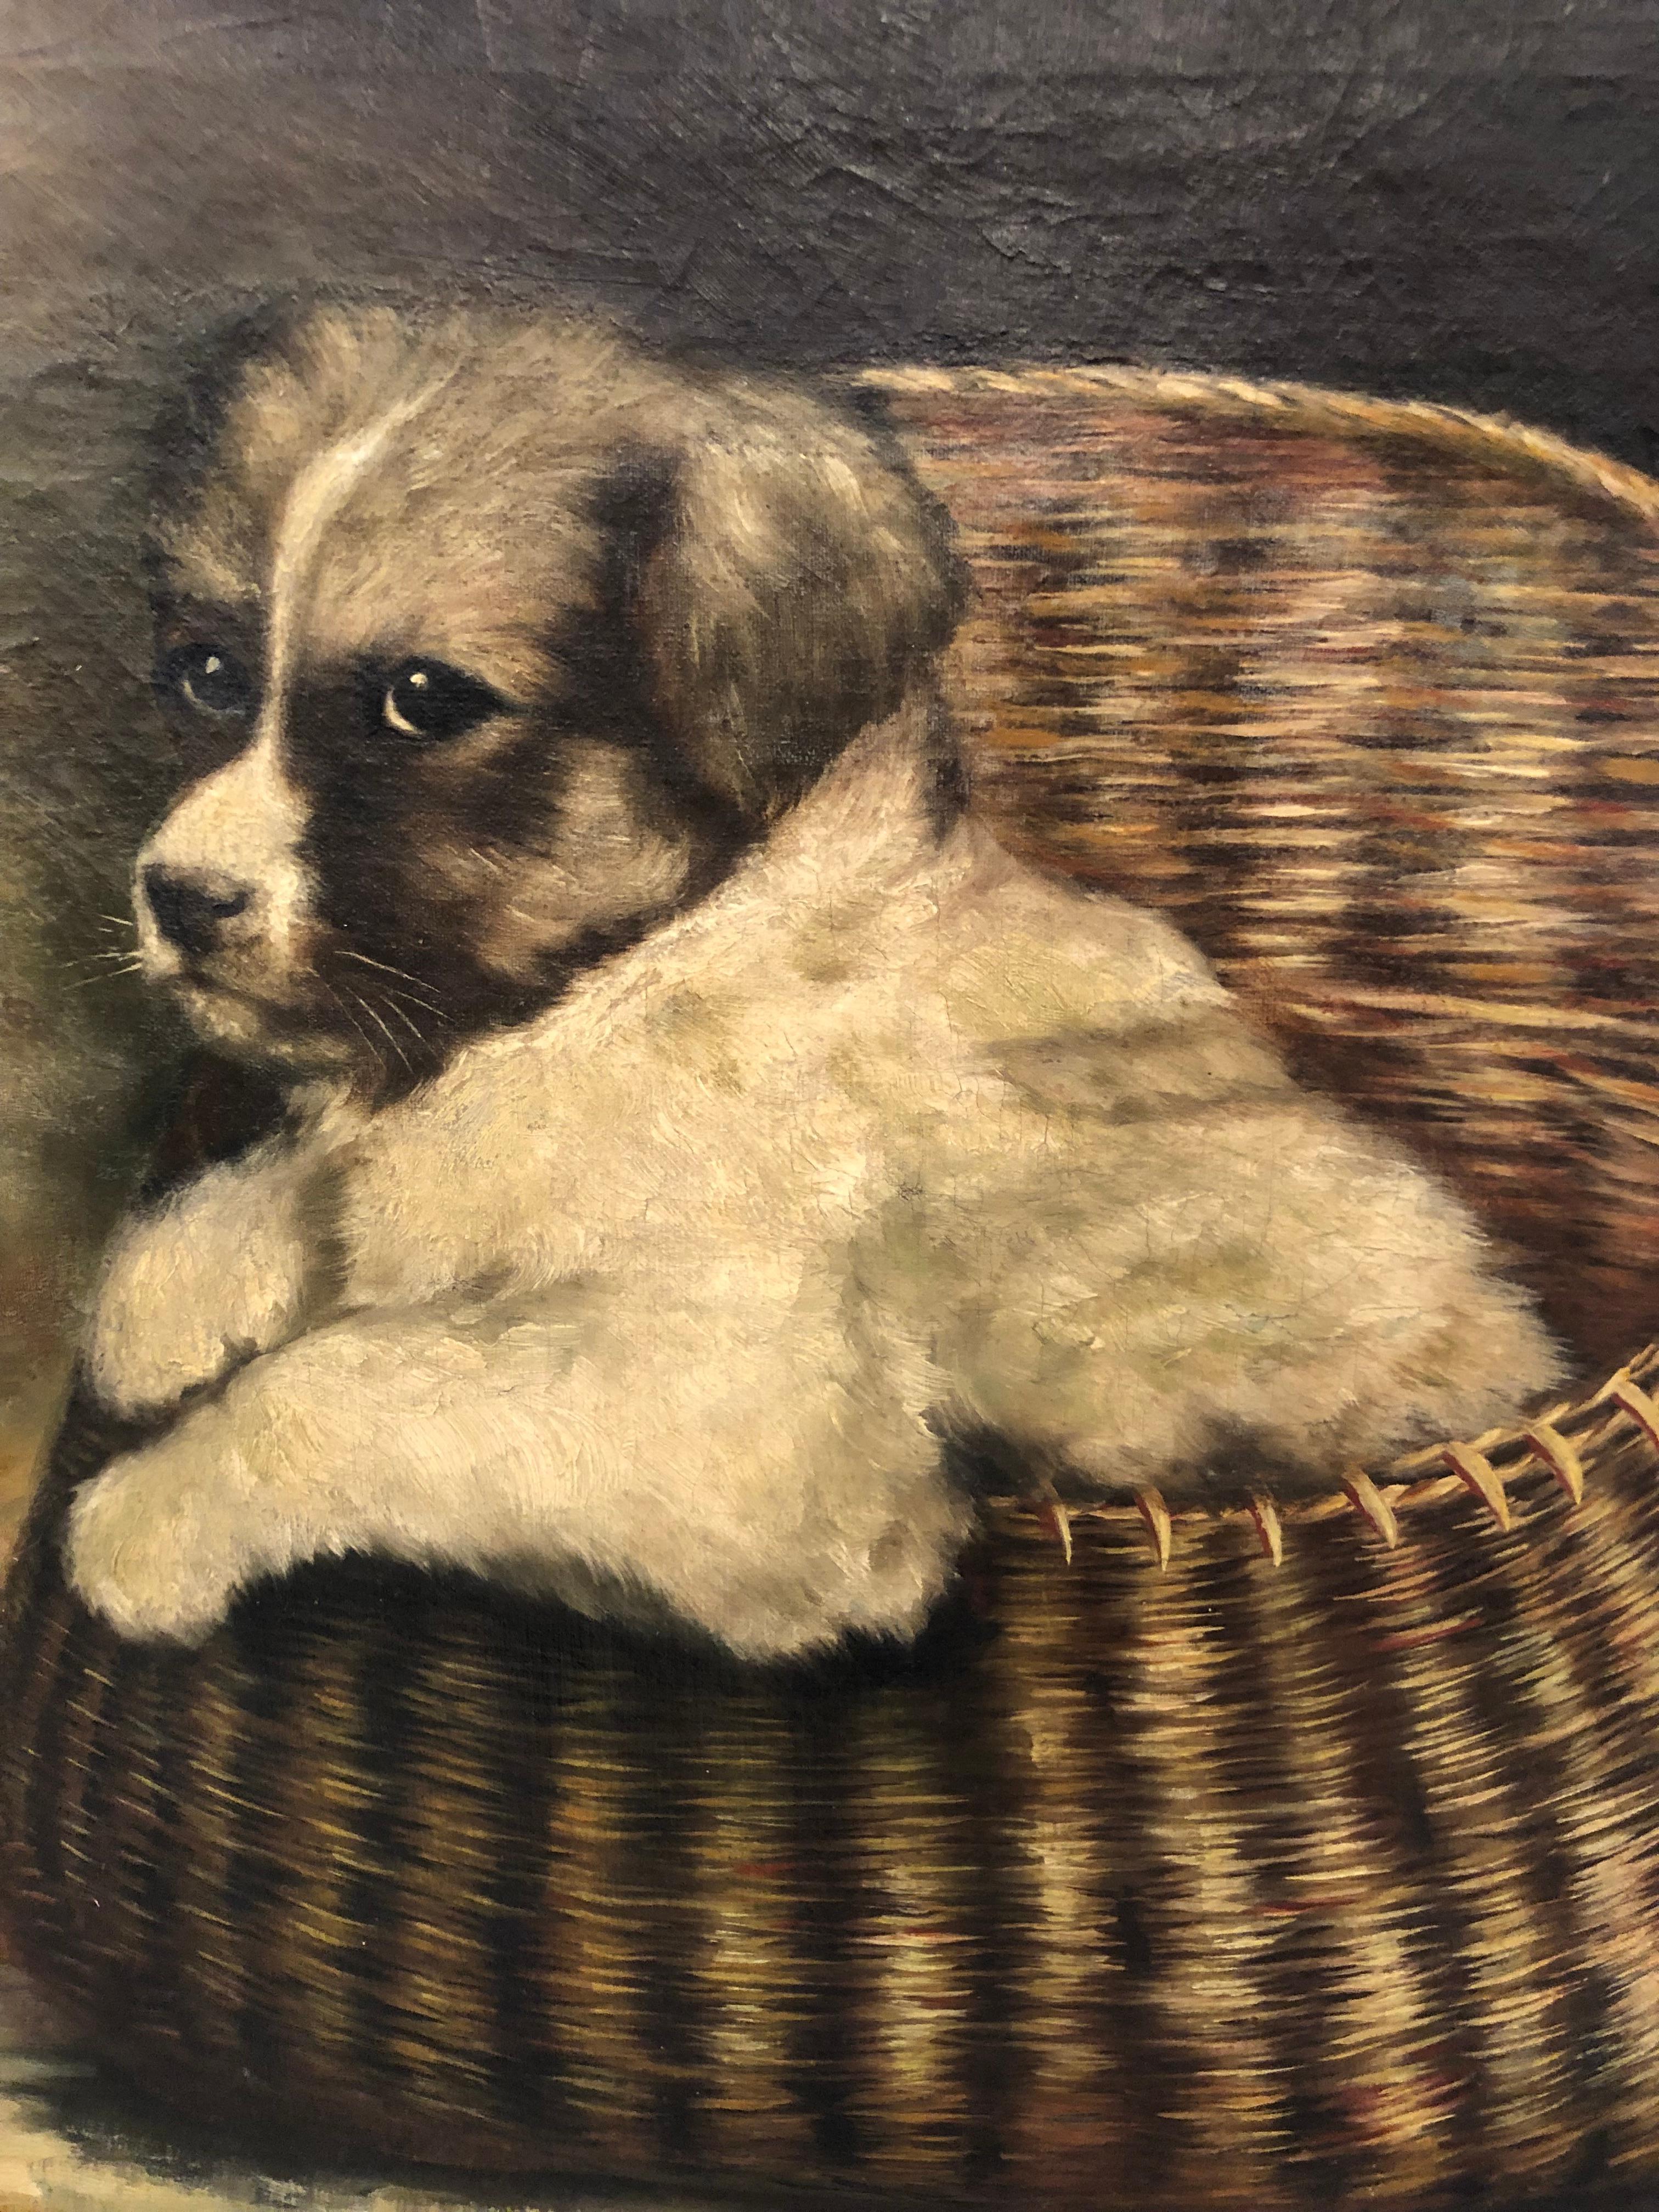 Irresistible beautifully rendered original painting from the 1800s of a black and white puppy in a basket. The spare color palette and dark background are striking, and the new custom frame compliments the art wonderfully.